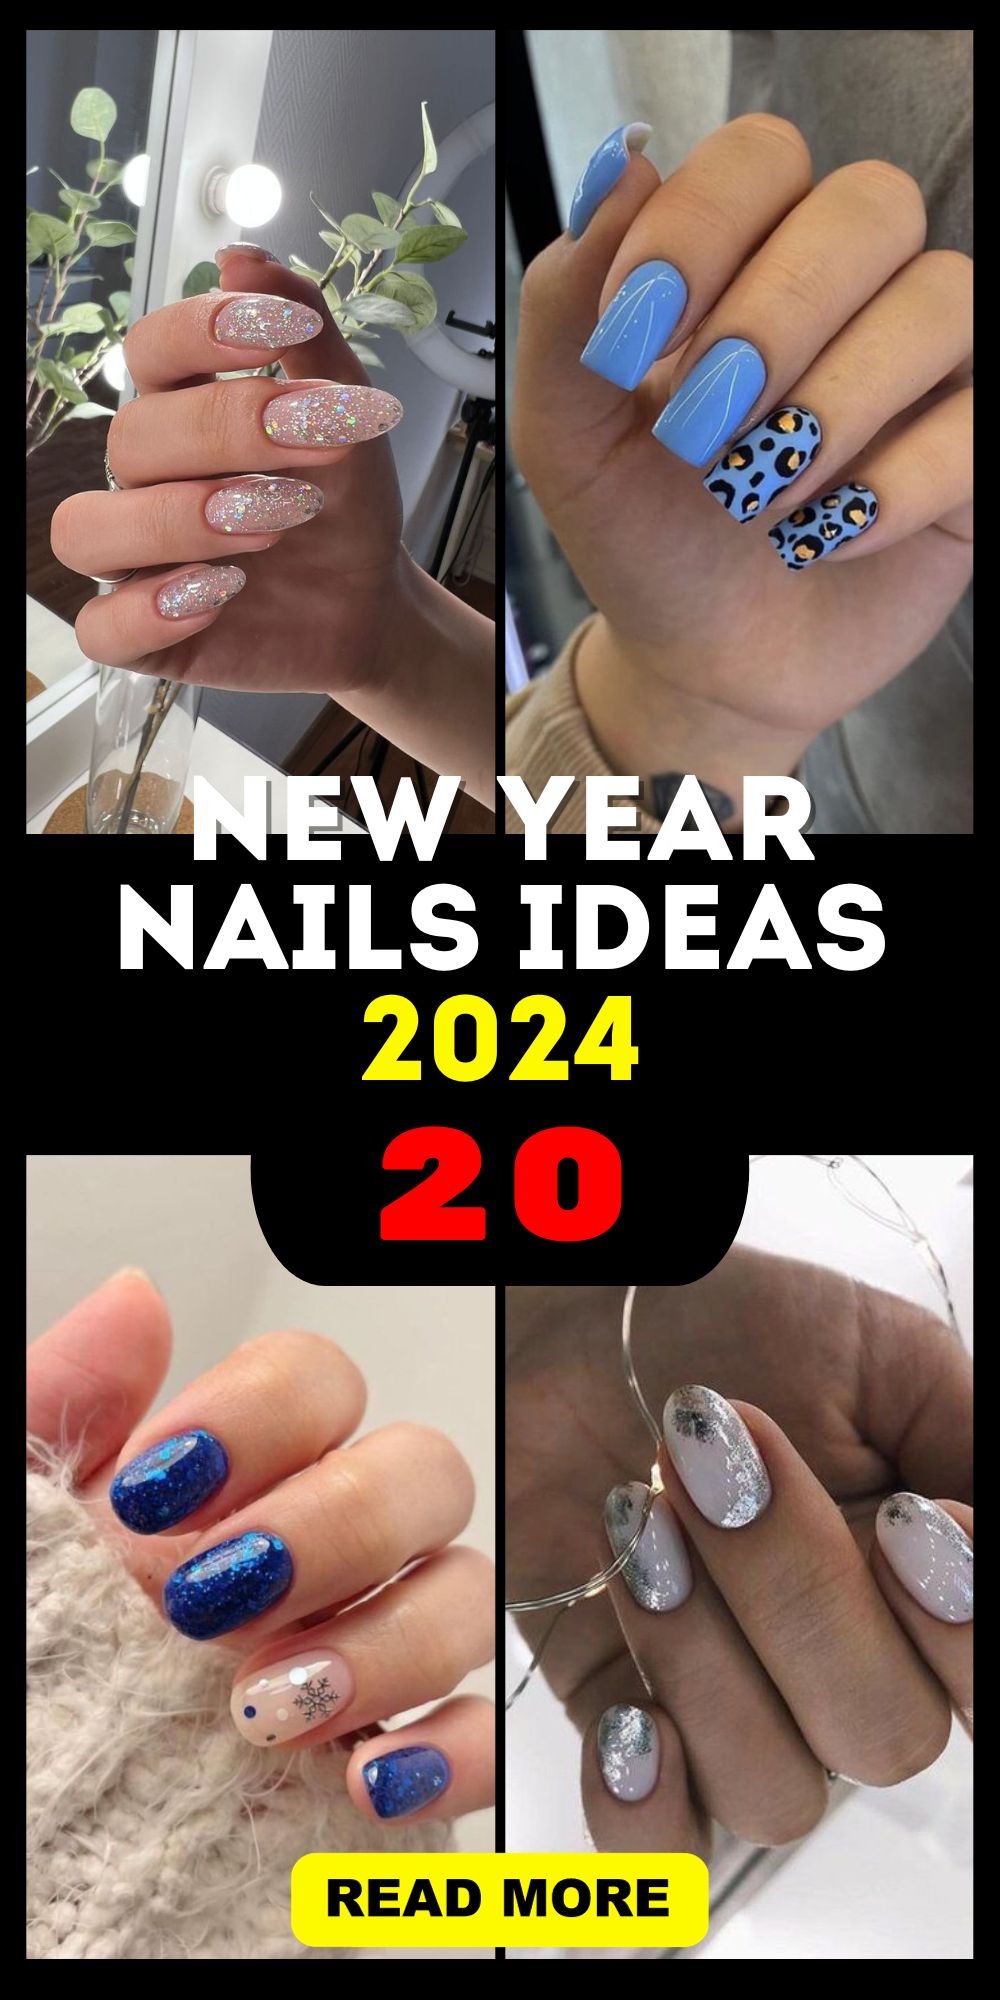 Elevate Your Style with New Year Nails 2024 - Designs, Colors, and Trends